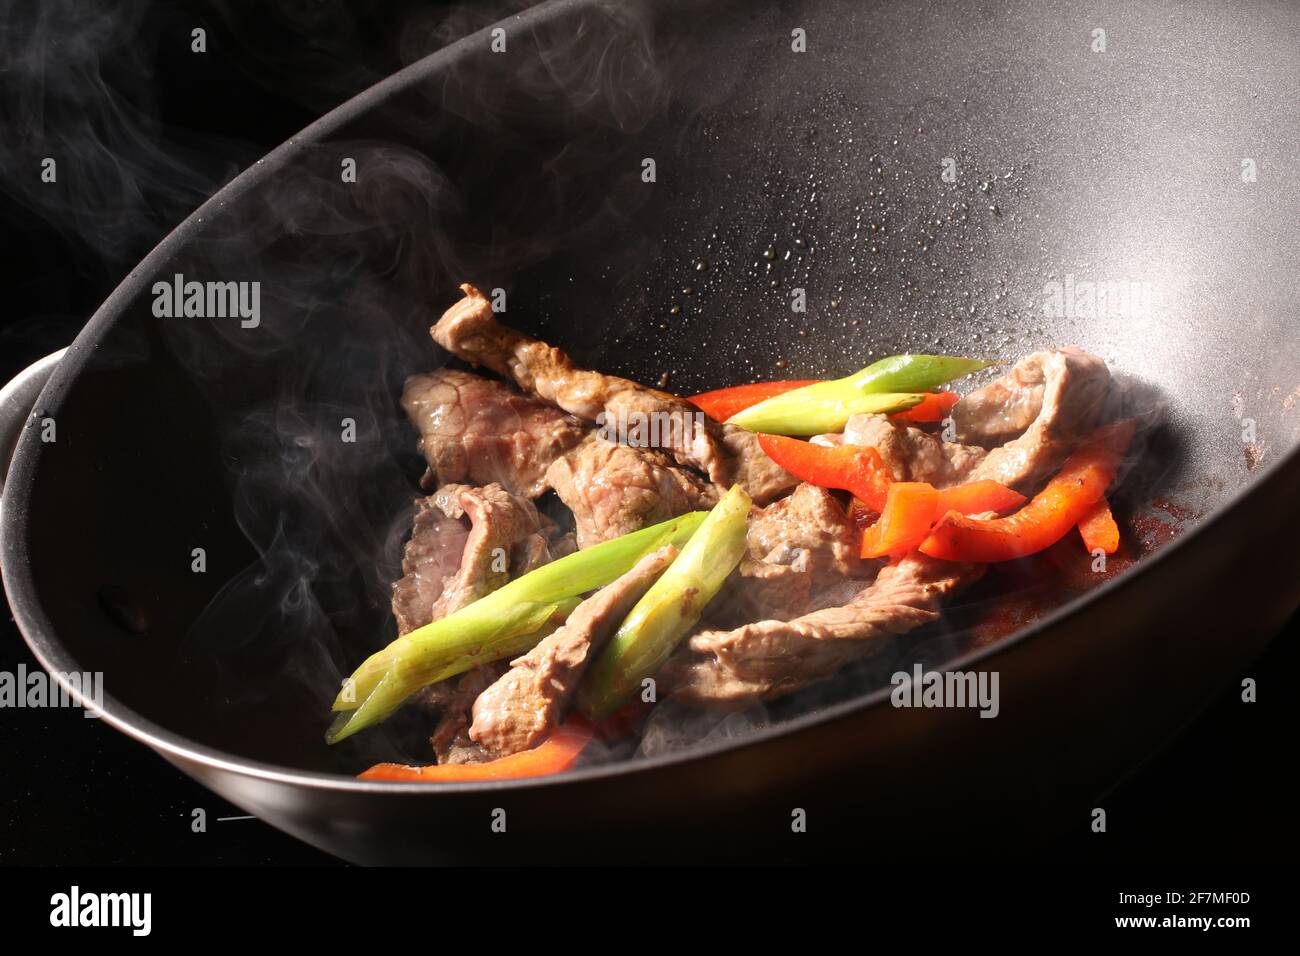 https://c8.alamy.com/comp/2F7MF0D/meat-cooking-in-a-large-frying-pan-with-spring-onions-and-red-peppers-with-steam-coming-off-2F7MF0D.jpg